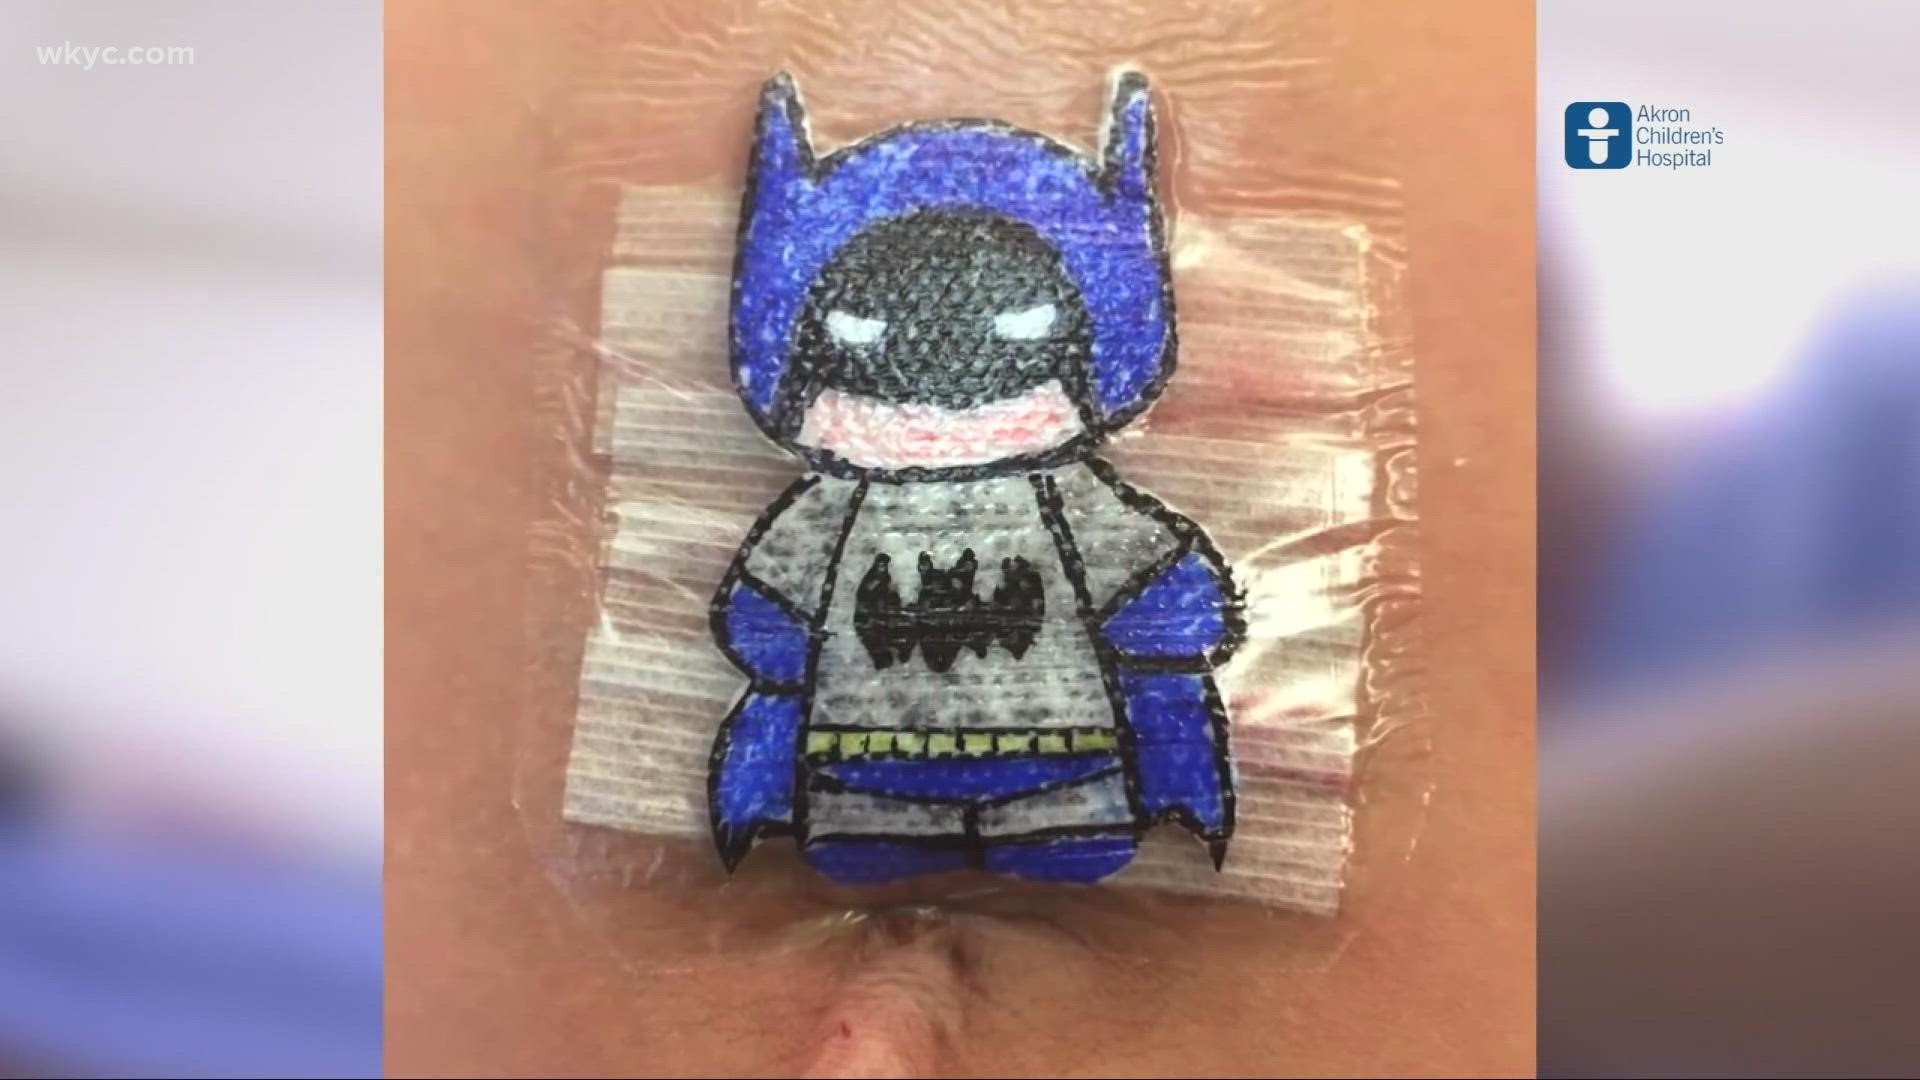 Dr. Bob Parry hand draws colorful characters and turns them into custom bandages to help ease fears of children going through surgery.